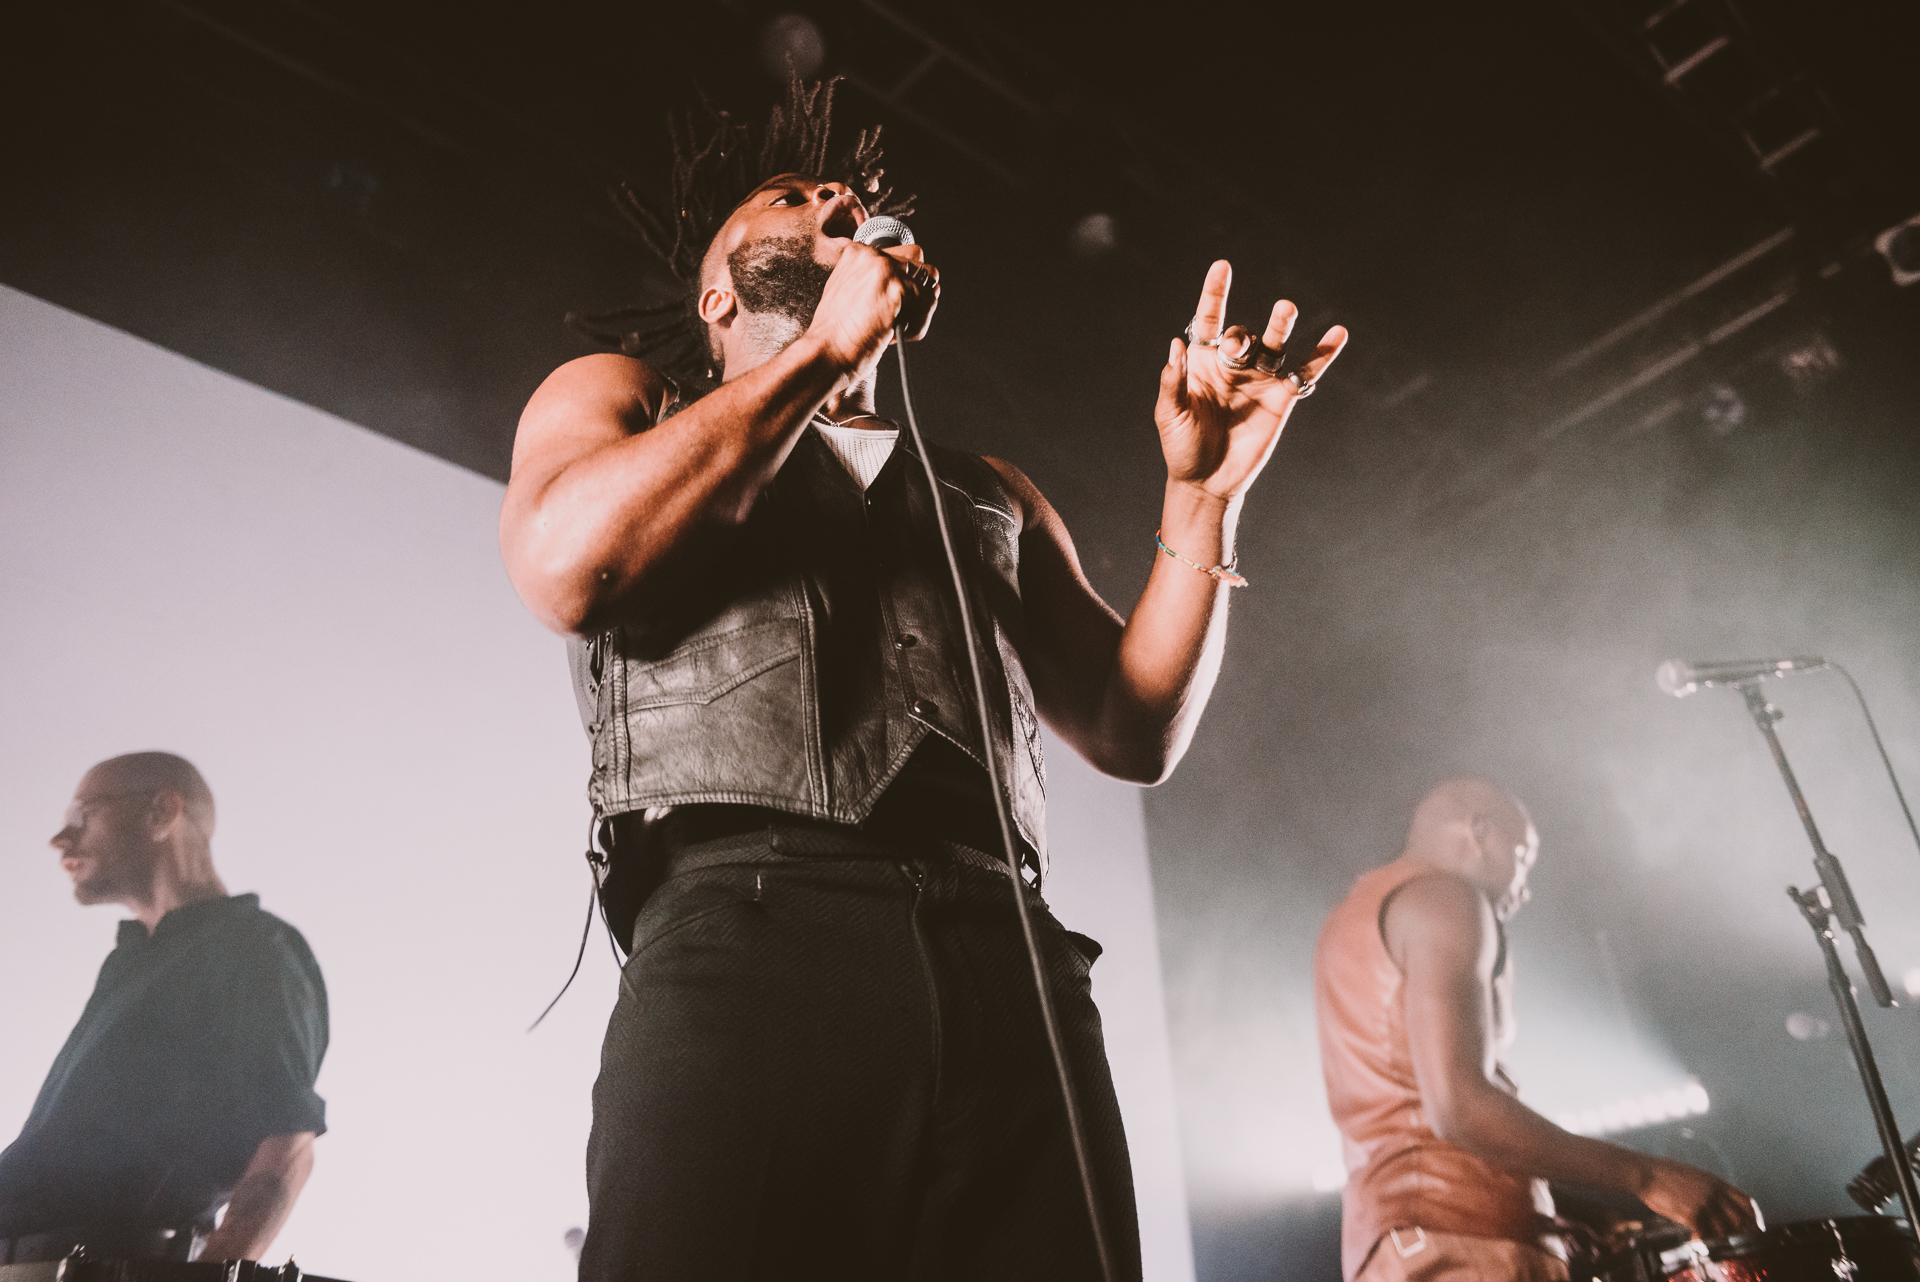 1_Young_Fathers-VENUE-Timothy_Nguyen-20181117 (17 of 23).jpg